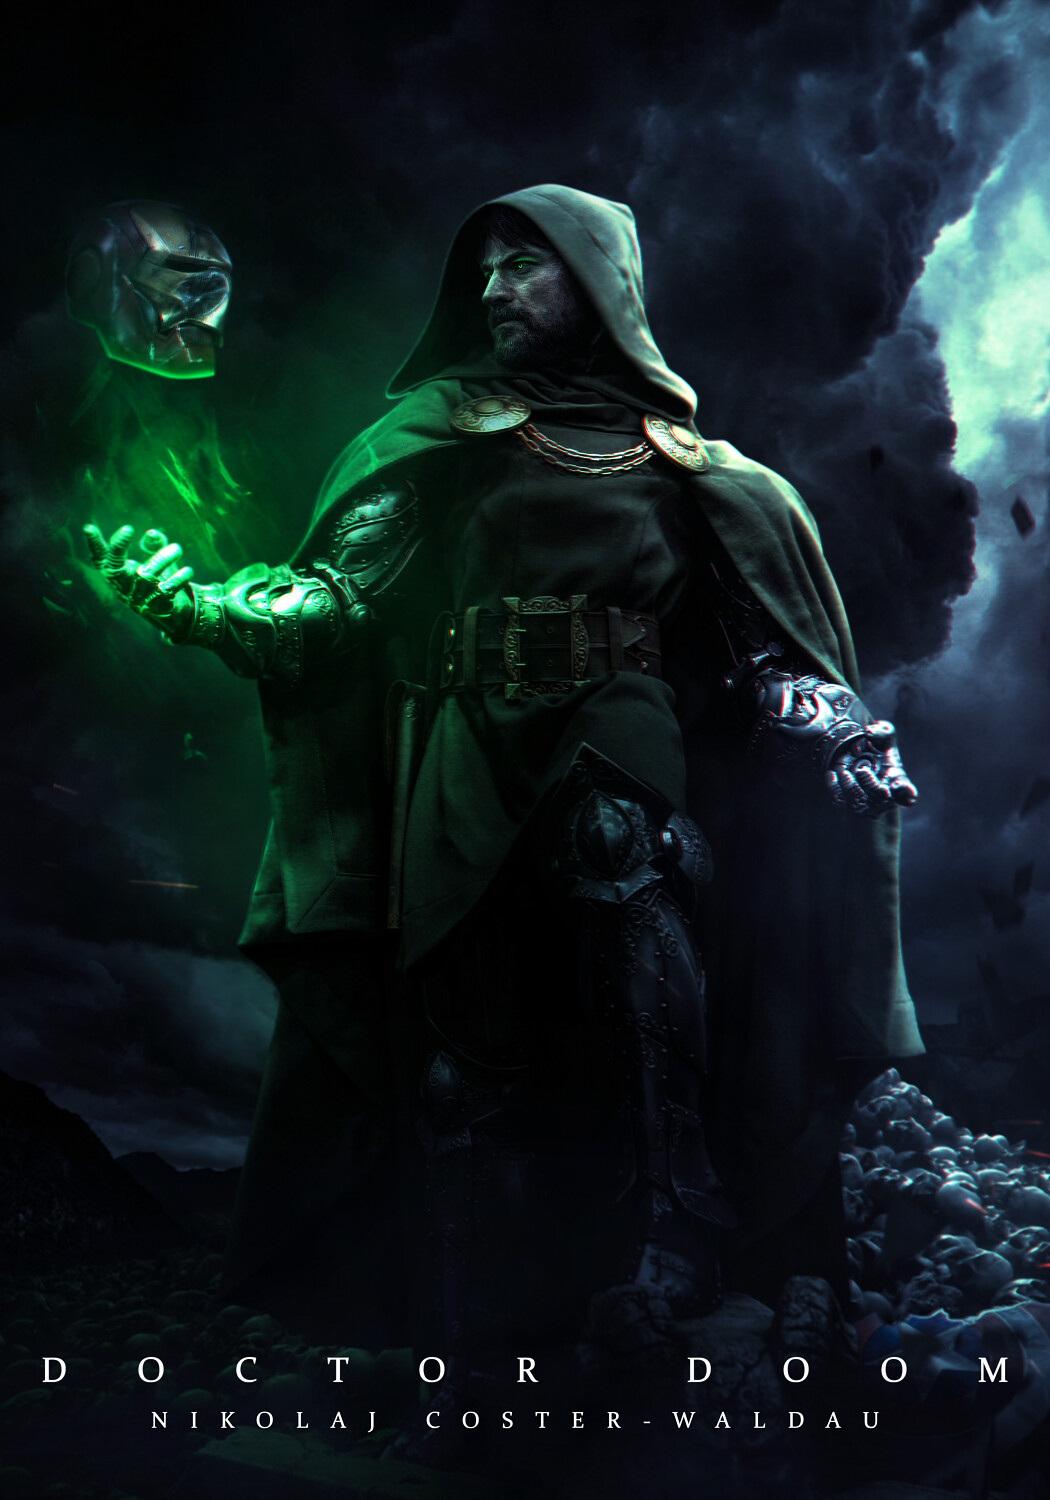 I wanted to do another Dr Doom piece of Nikolai Coster Waldau after all the...